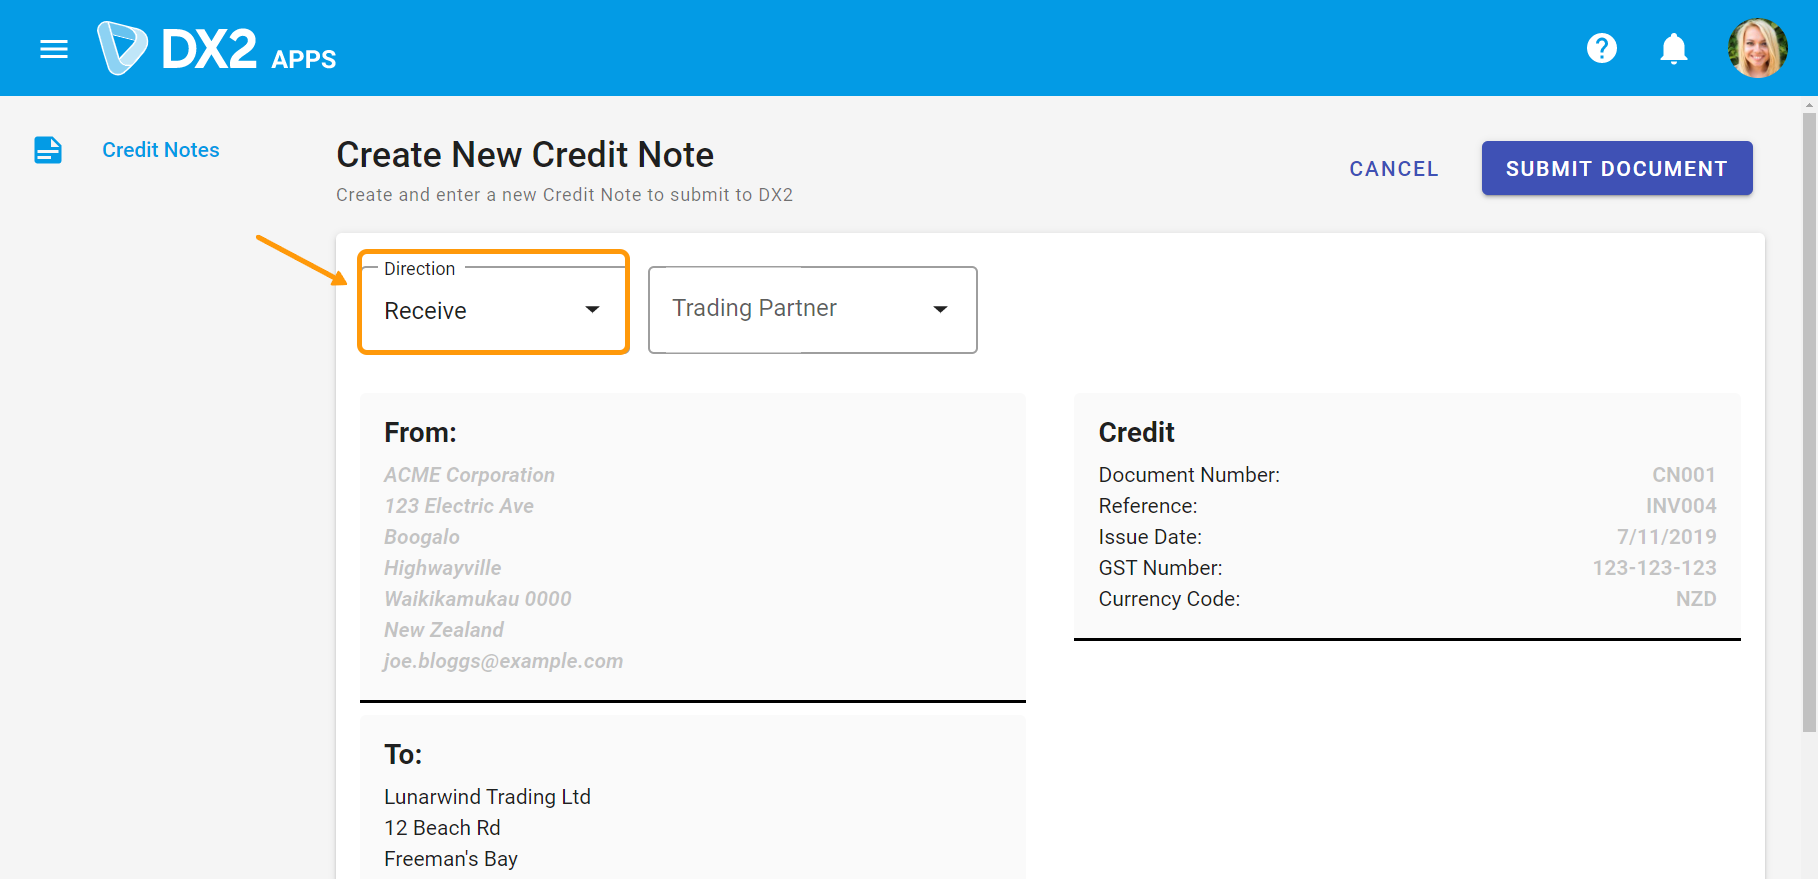 Shows the direction sending the Credit Note to in manual entry